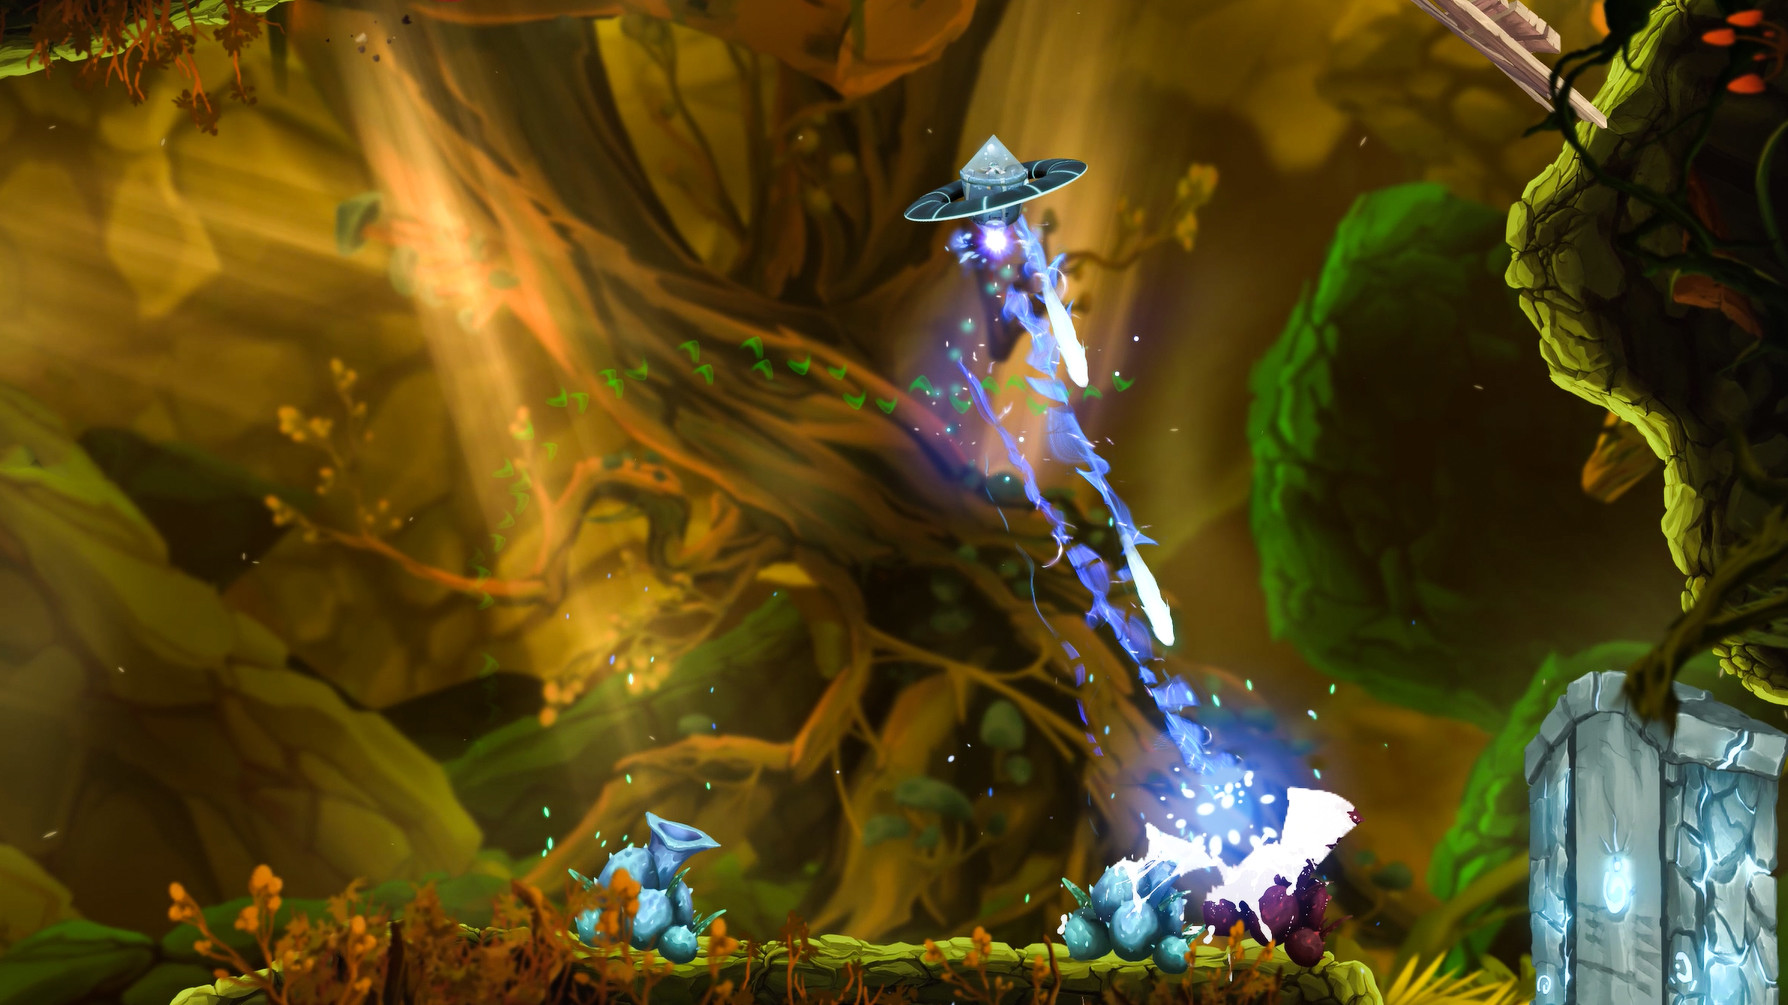 A screenshot from the Moo Lander demo, showing a UFO in a natural forest environment reminiscent of Ori and the Blind Forest